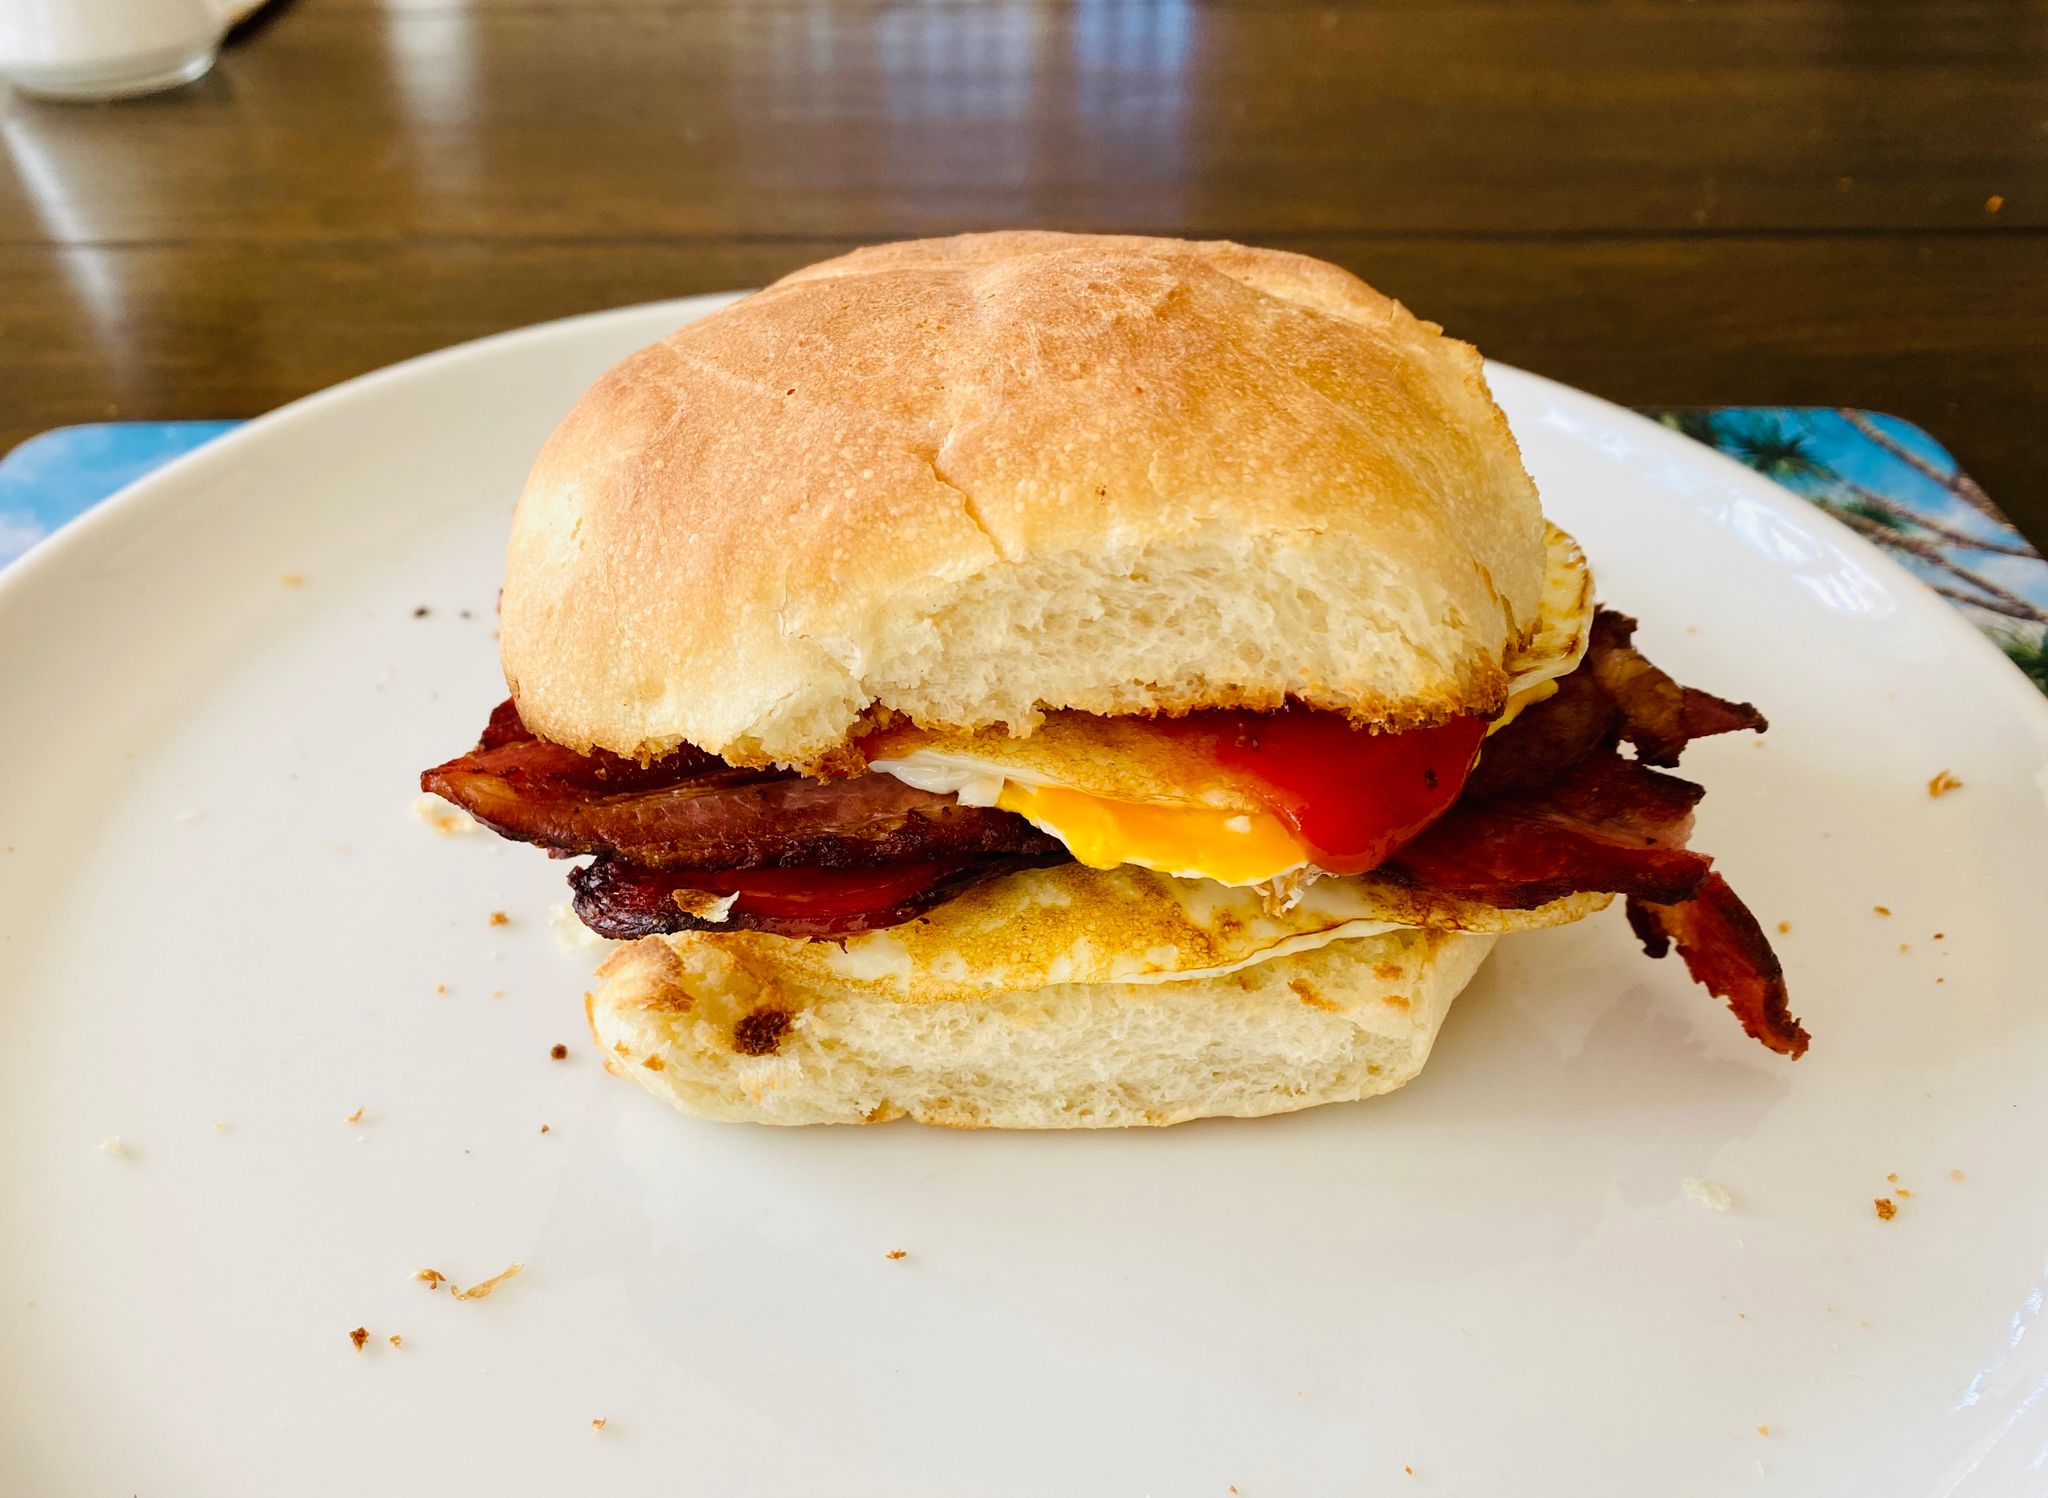 A photo of a bacon and egg roll sitting on a plate, with a little bit of ketchup just visible.